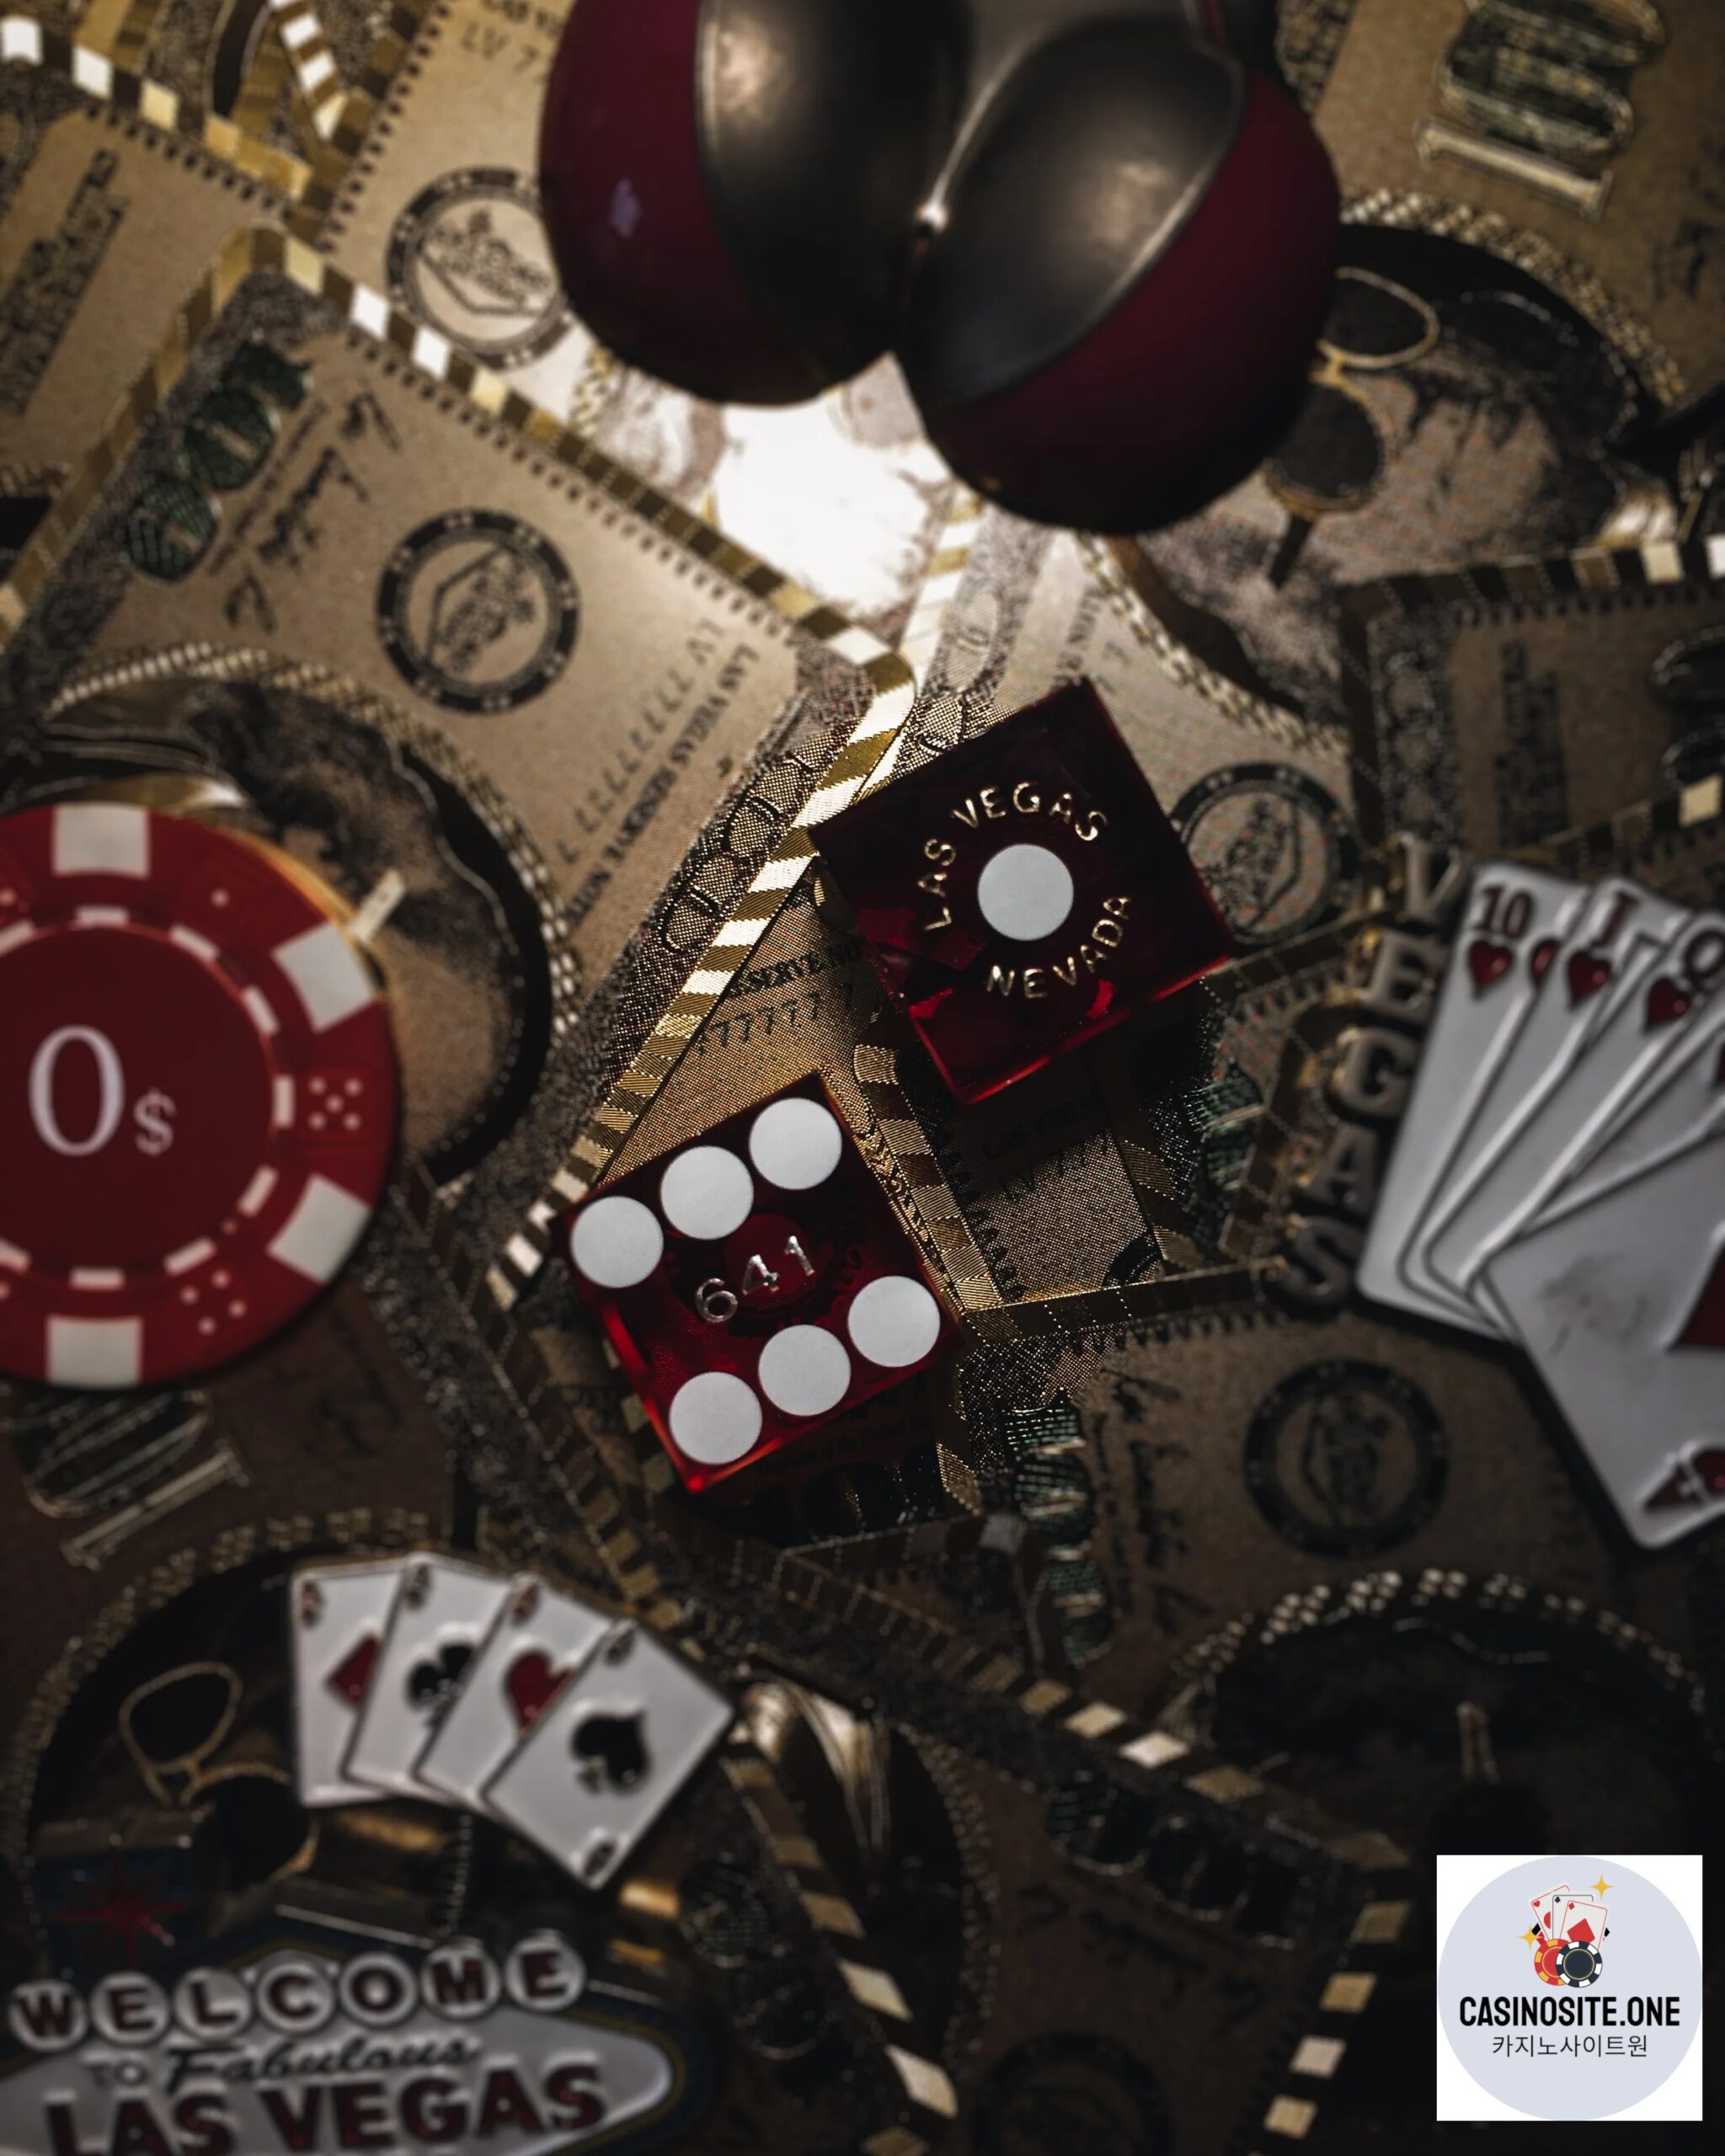 Taking The Mystery Through Baccarat